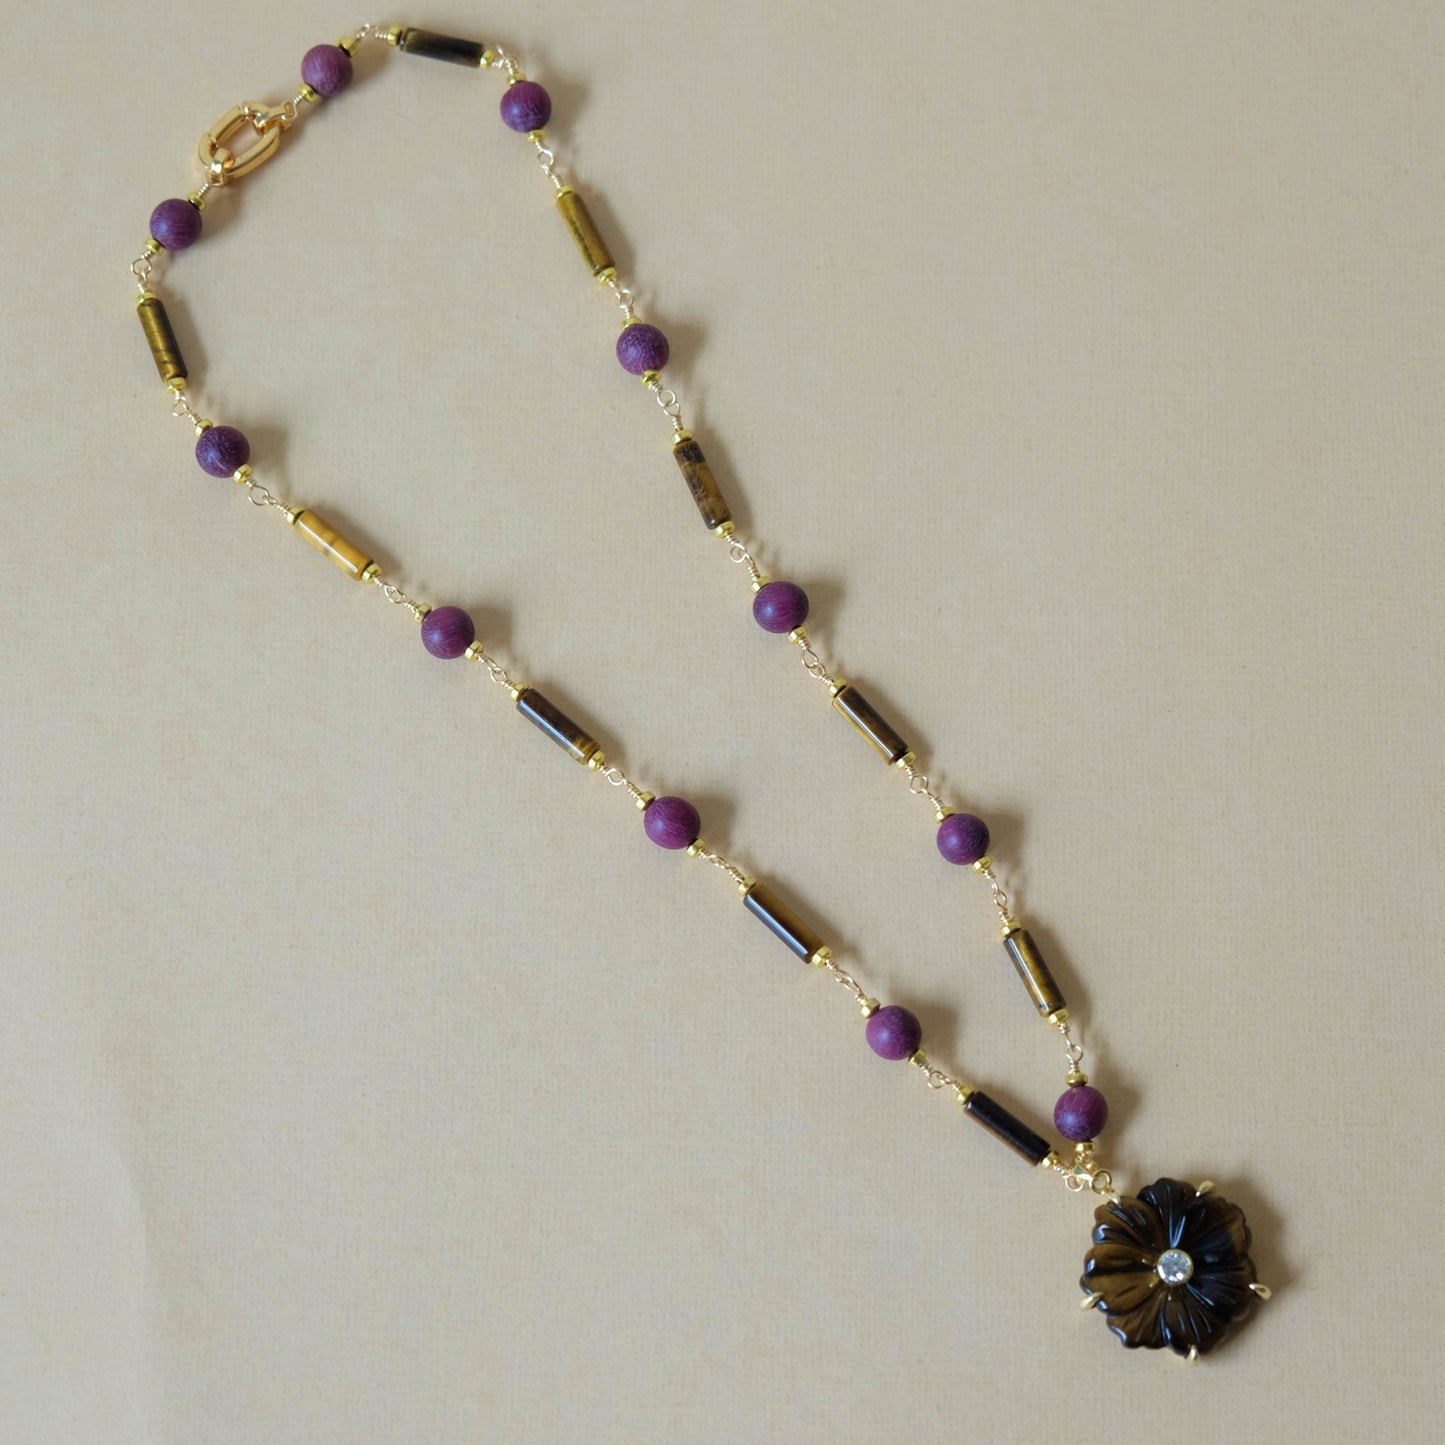 Tiger Eye and Rosewood Flower Necklace